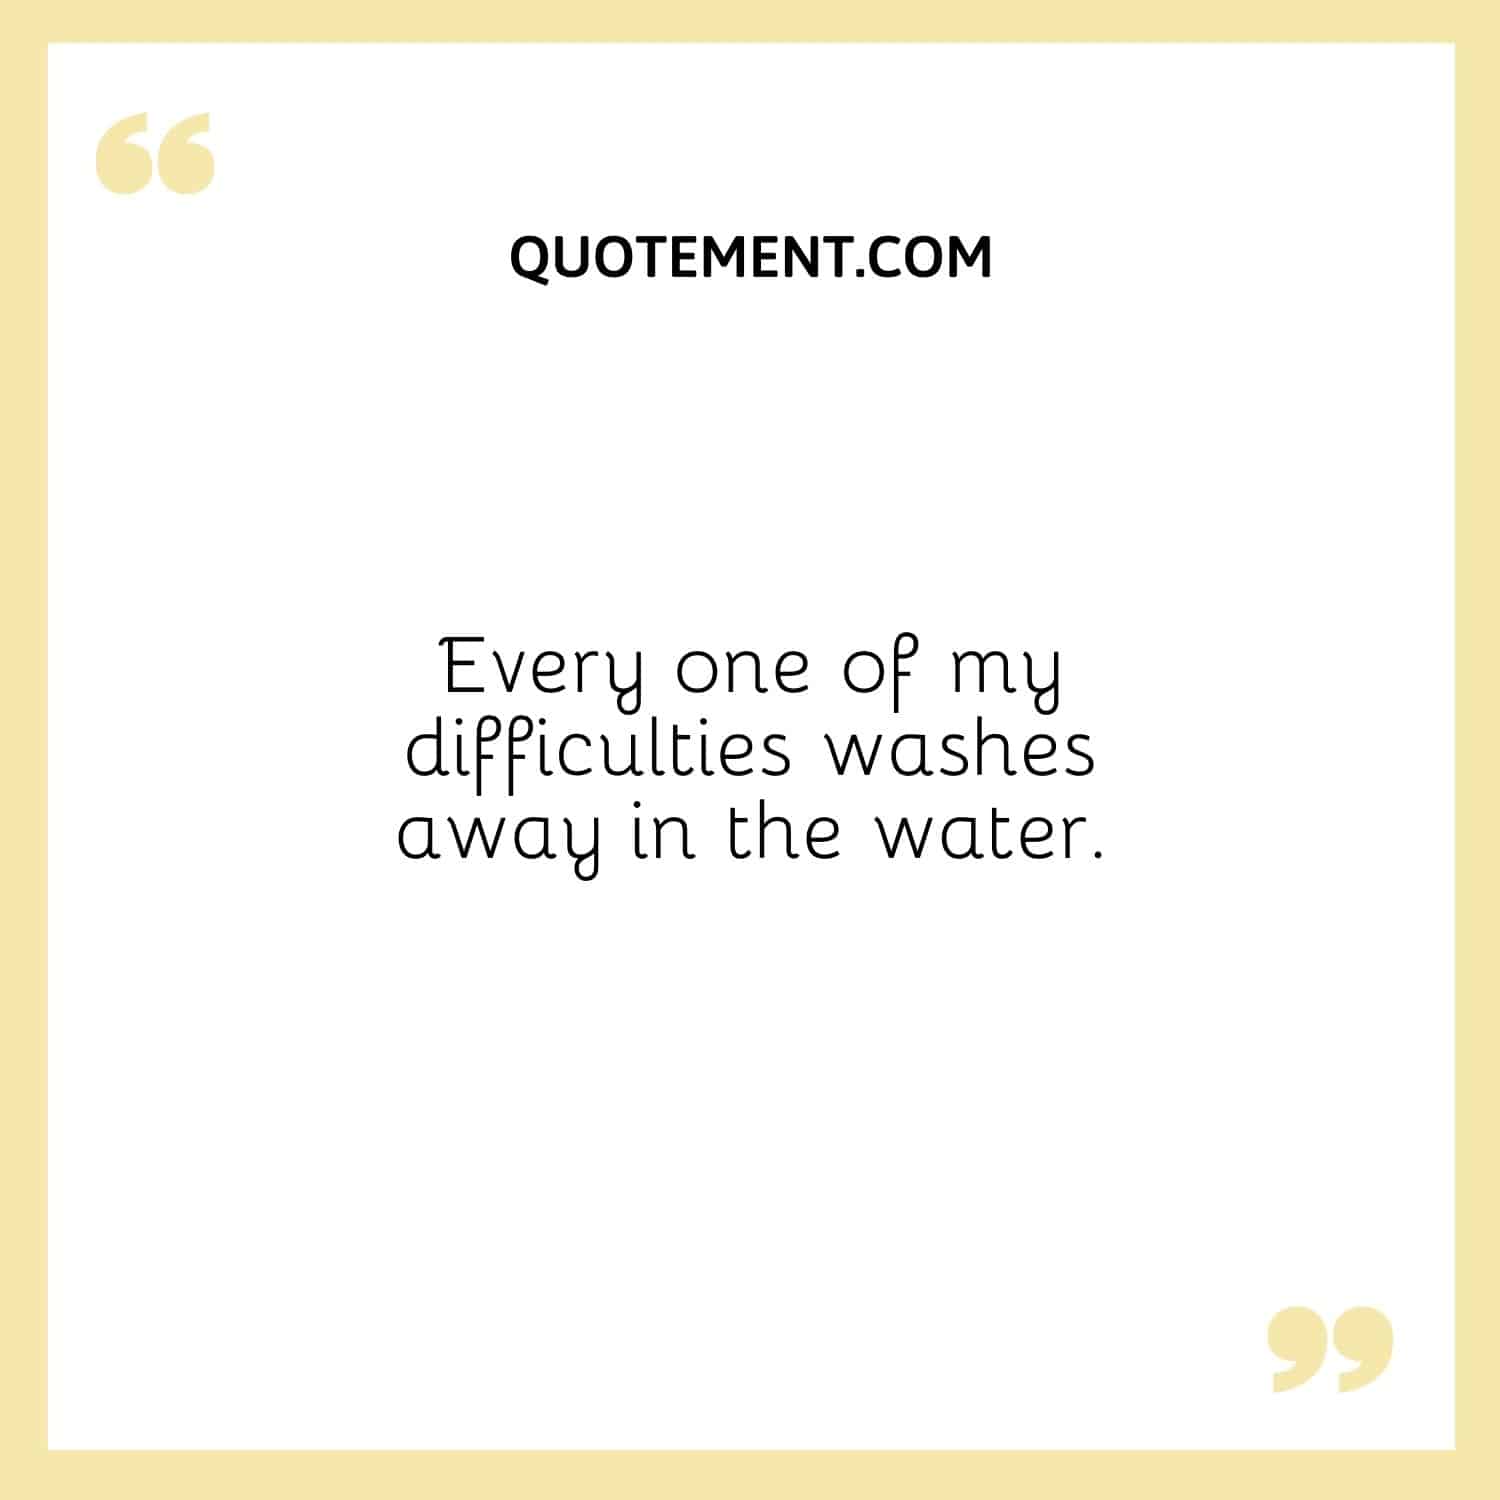 Every one of my difficulties washes away in the water.